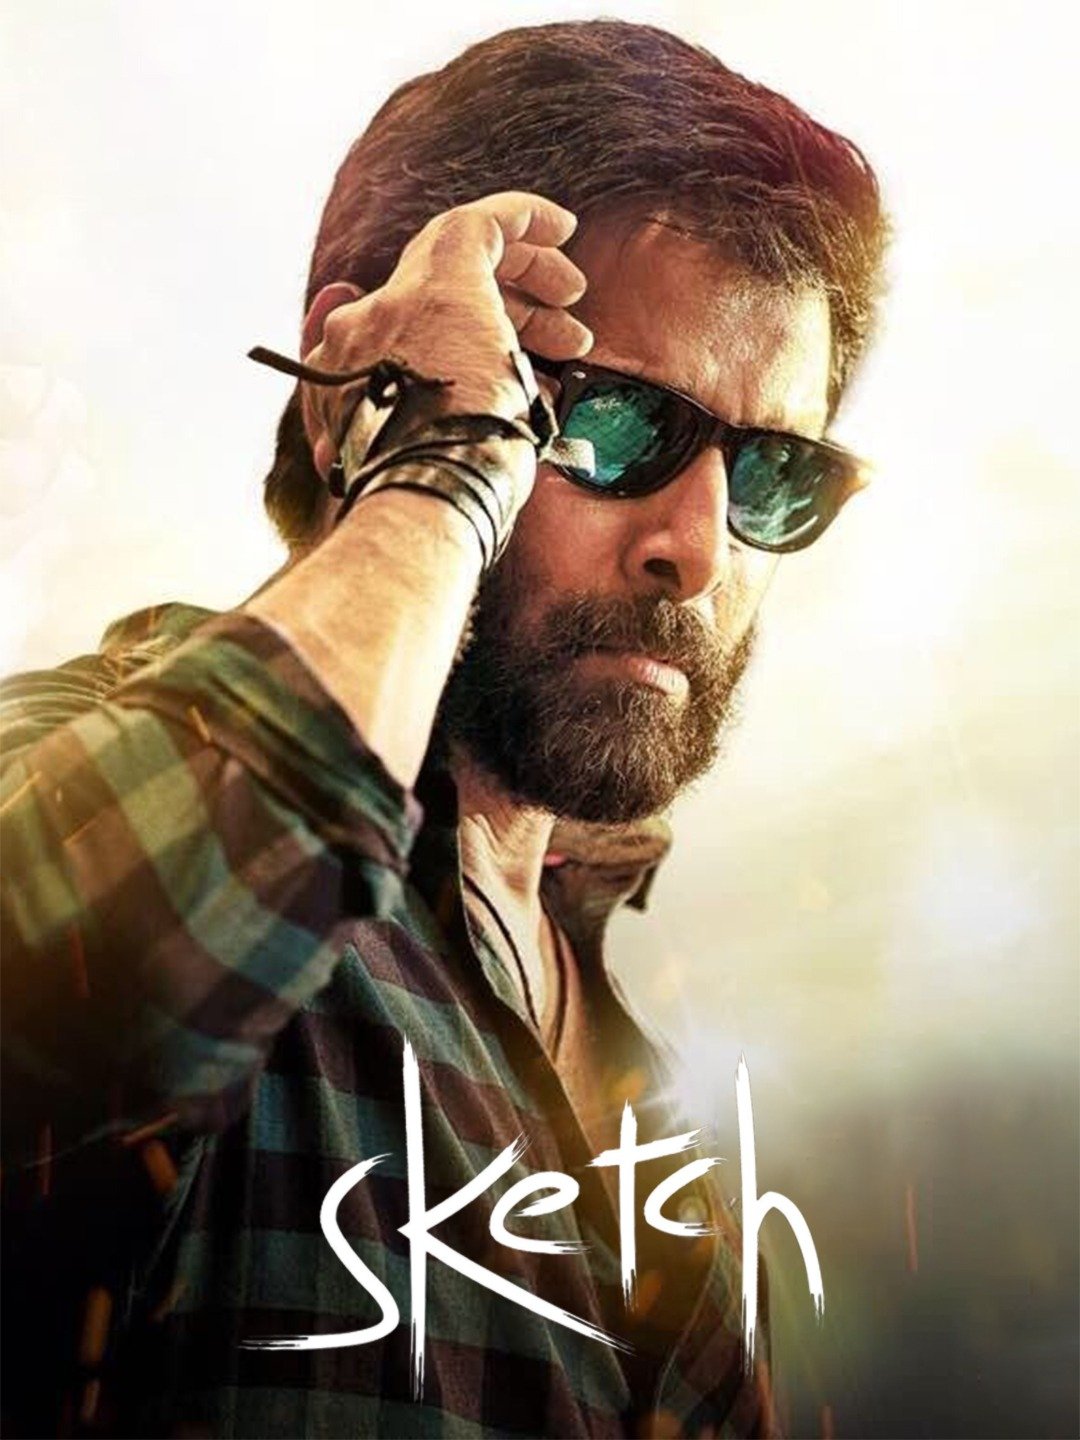 Sketch Movie Review 255 Critic Review of Sketch by Times of India